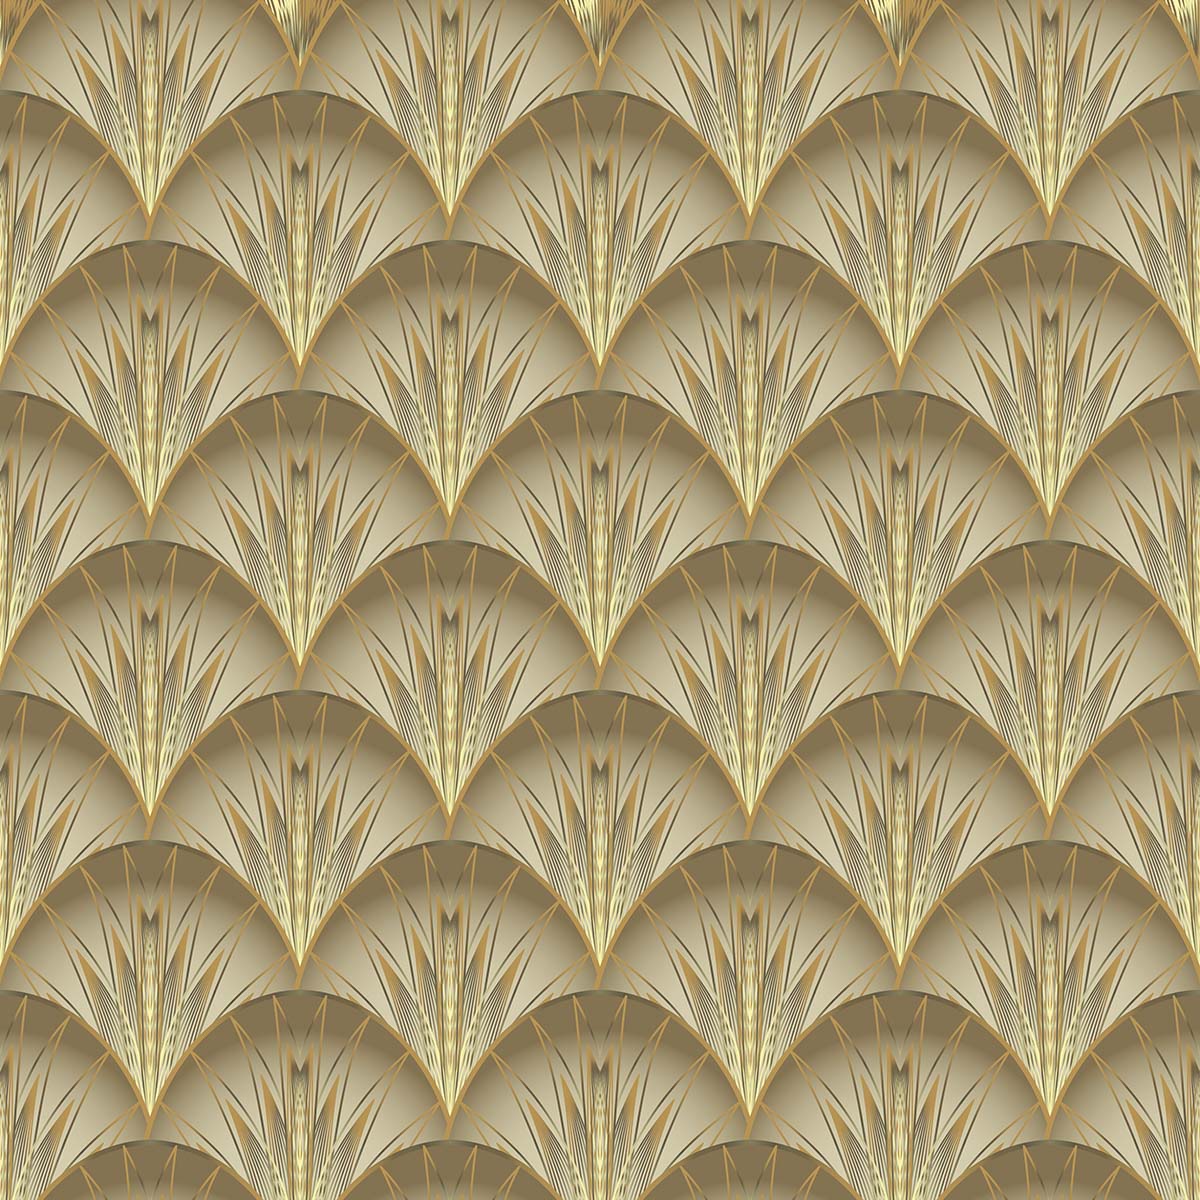 A pattern of gold and white art deco